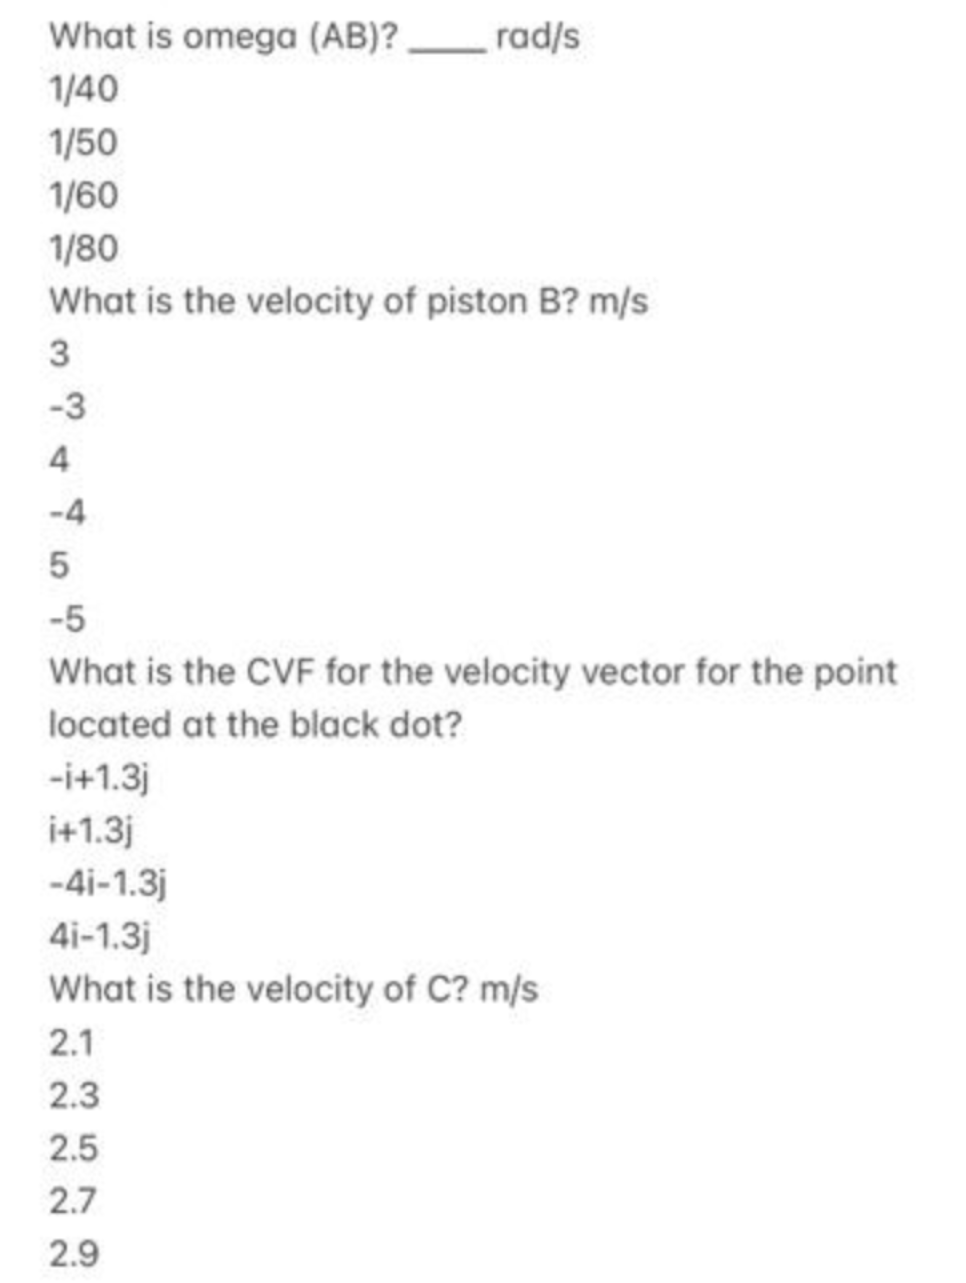 What is omega (AB)? rad/s
1/40
1/50
1/60
1/80
What is the velocity of piston B? m/s
3
-3
4
-4
5
-5
What is the CVF for the velocity vector for the point
located at the black dot?
-i+1.3j
i+1.3j
-4i-1.3j
4i-1.3j
What is the velocity of C? m/s
2.1
2.3
2.5
2.7
2.9